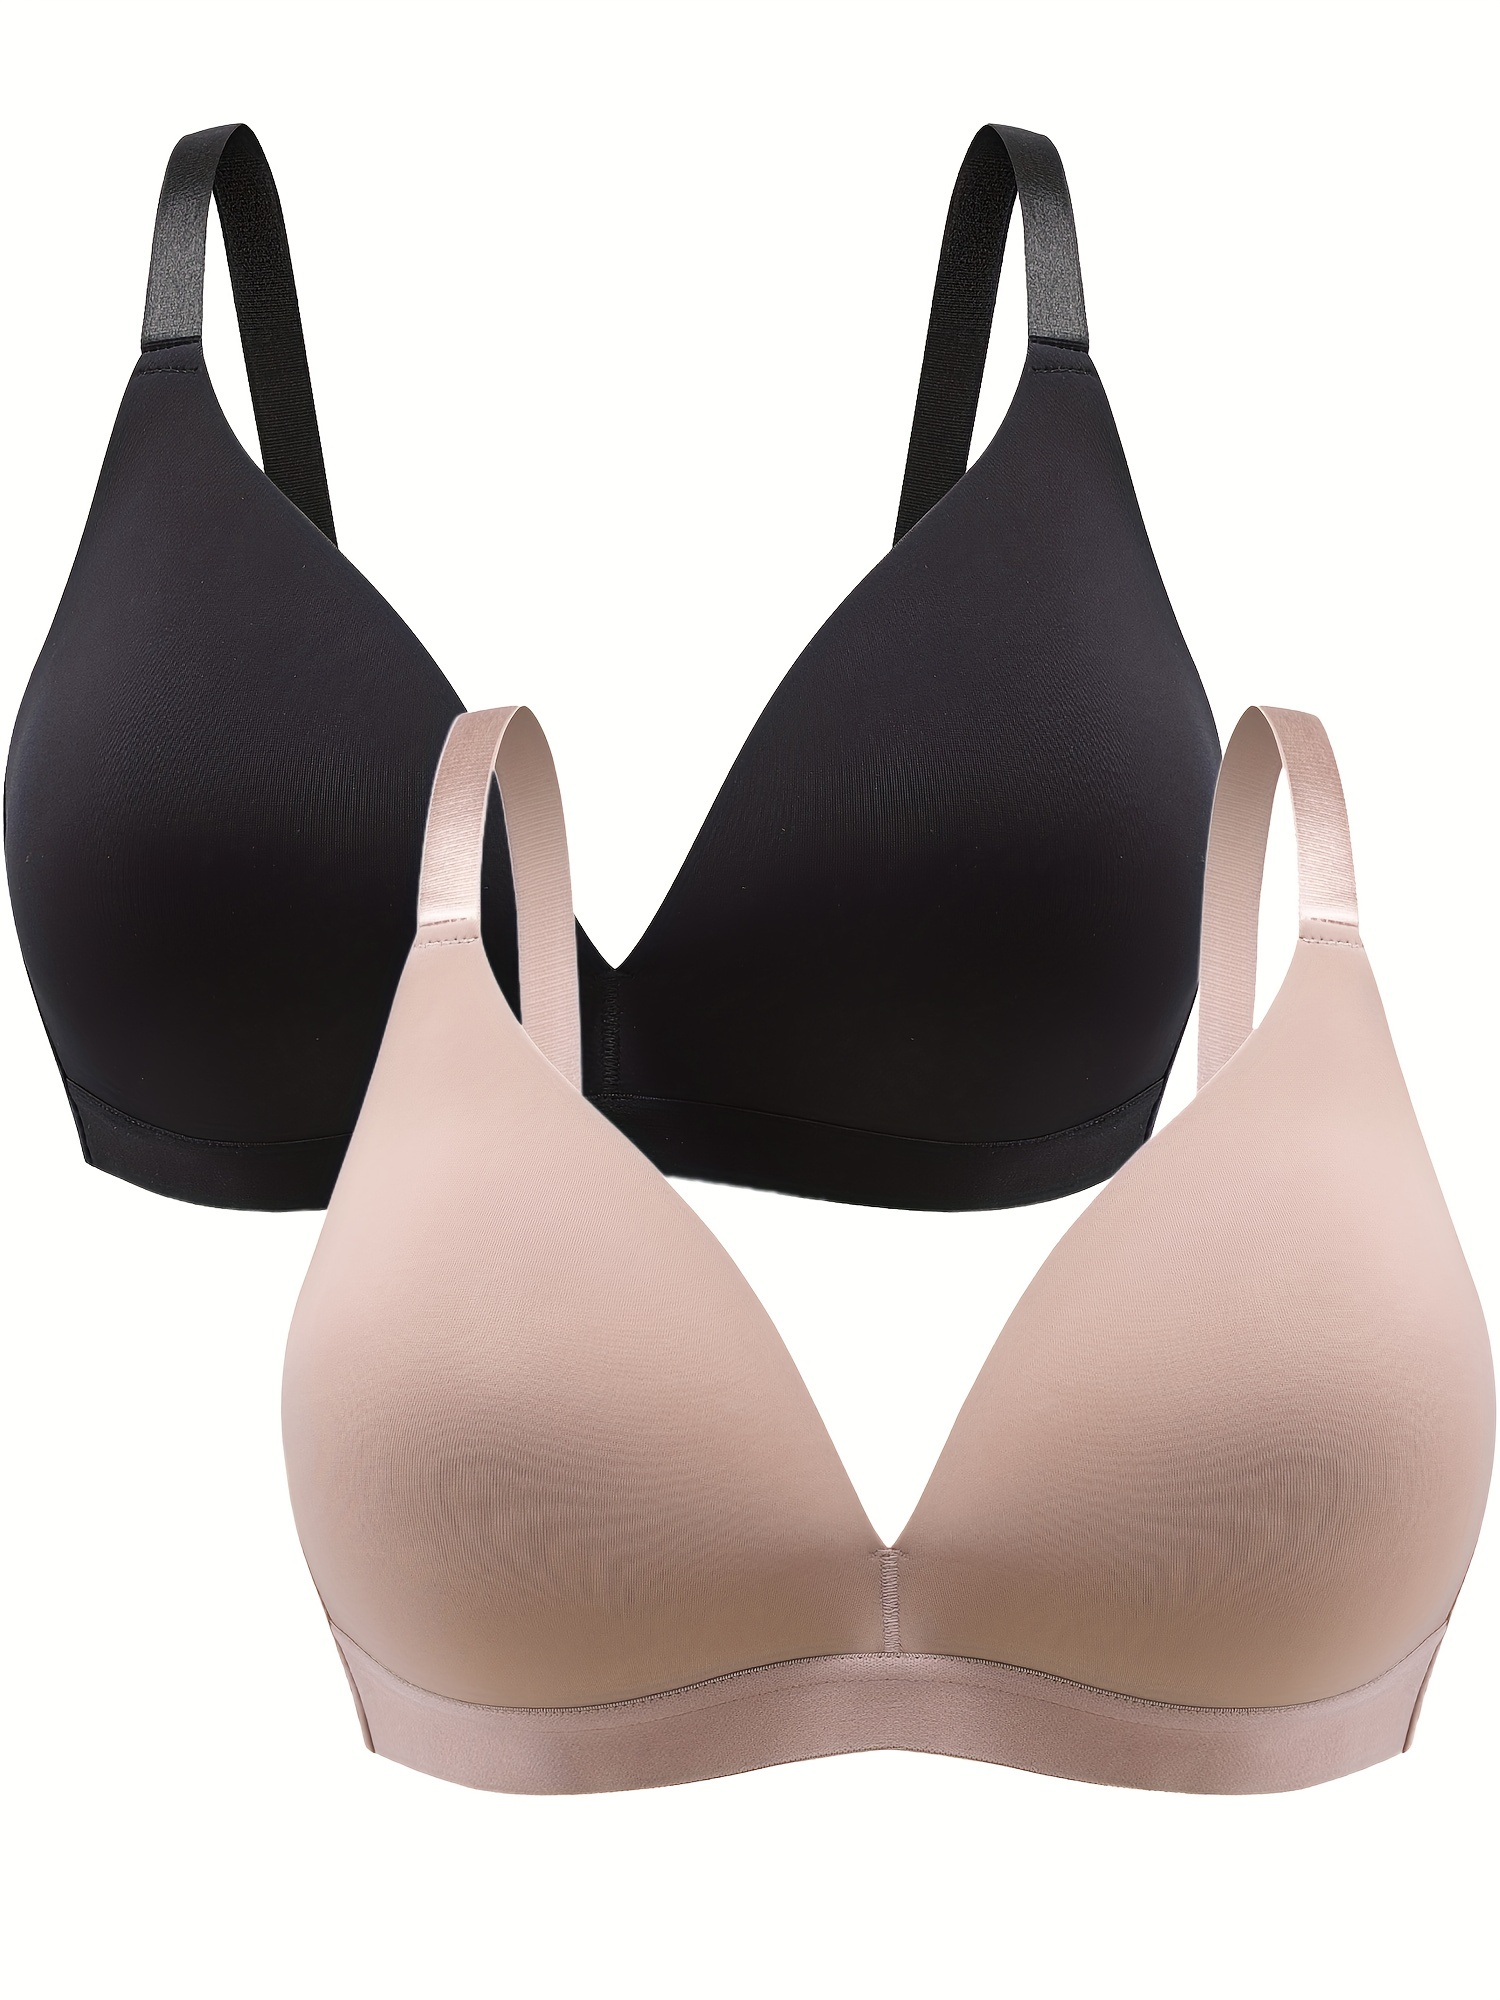 HAOAN Womens 3 Pack - Wireless Bra for Women Solid Color Seamless